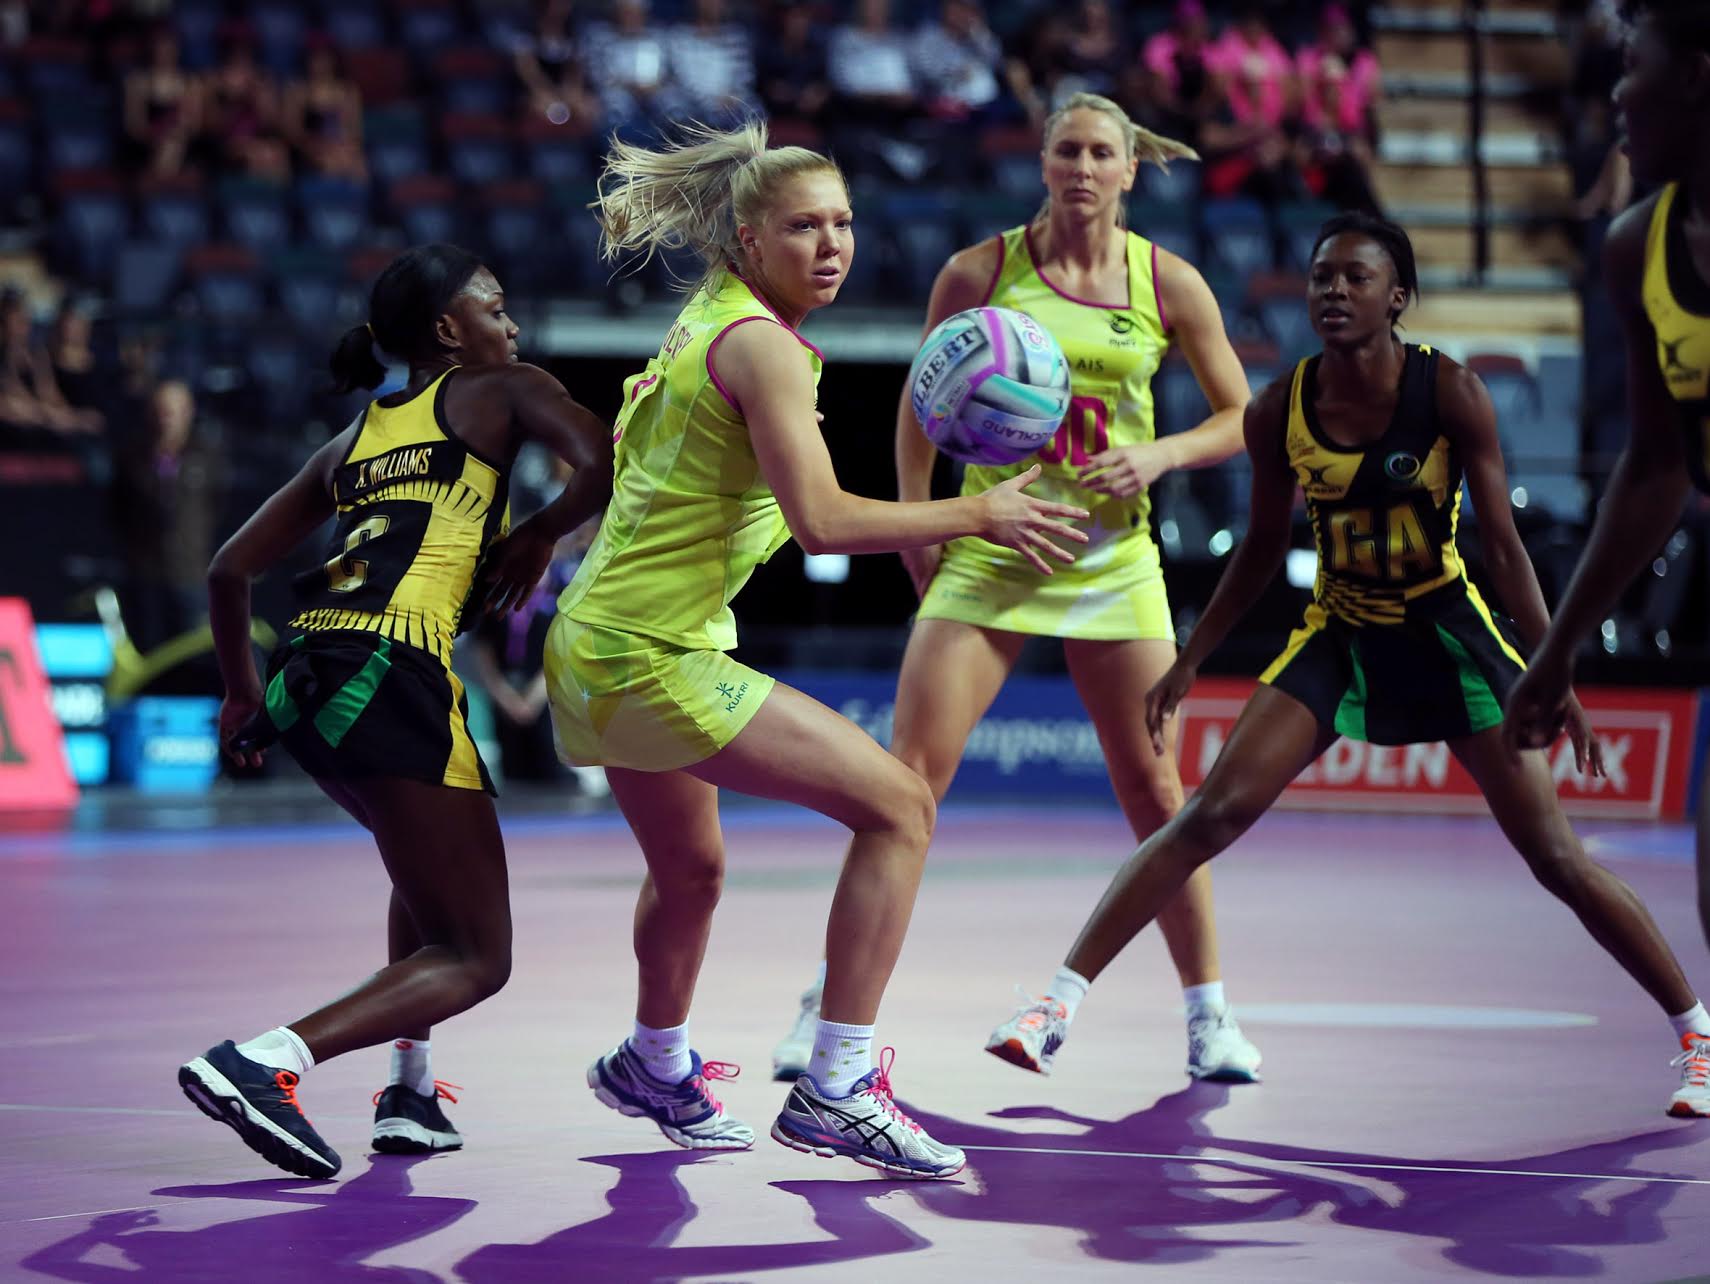 08.11.2014 Australia's Kate Moloney in action during the netball match between Australia and Jamaica at the Fast5 Netball World Series at Vector Arena in Auckland. Mandatory Photo Credit ©Michael Bradley.